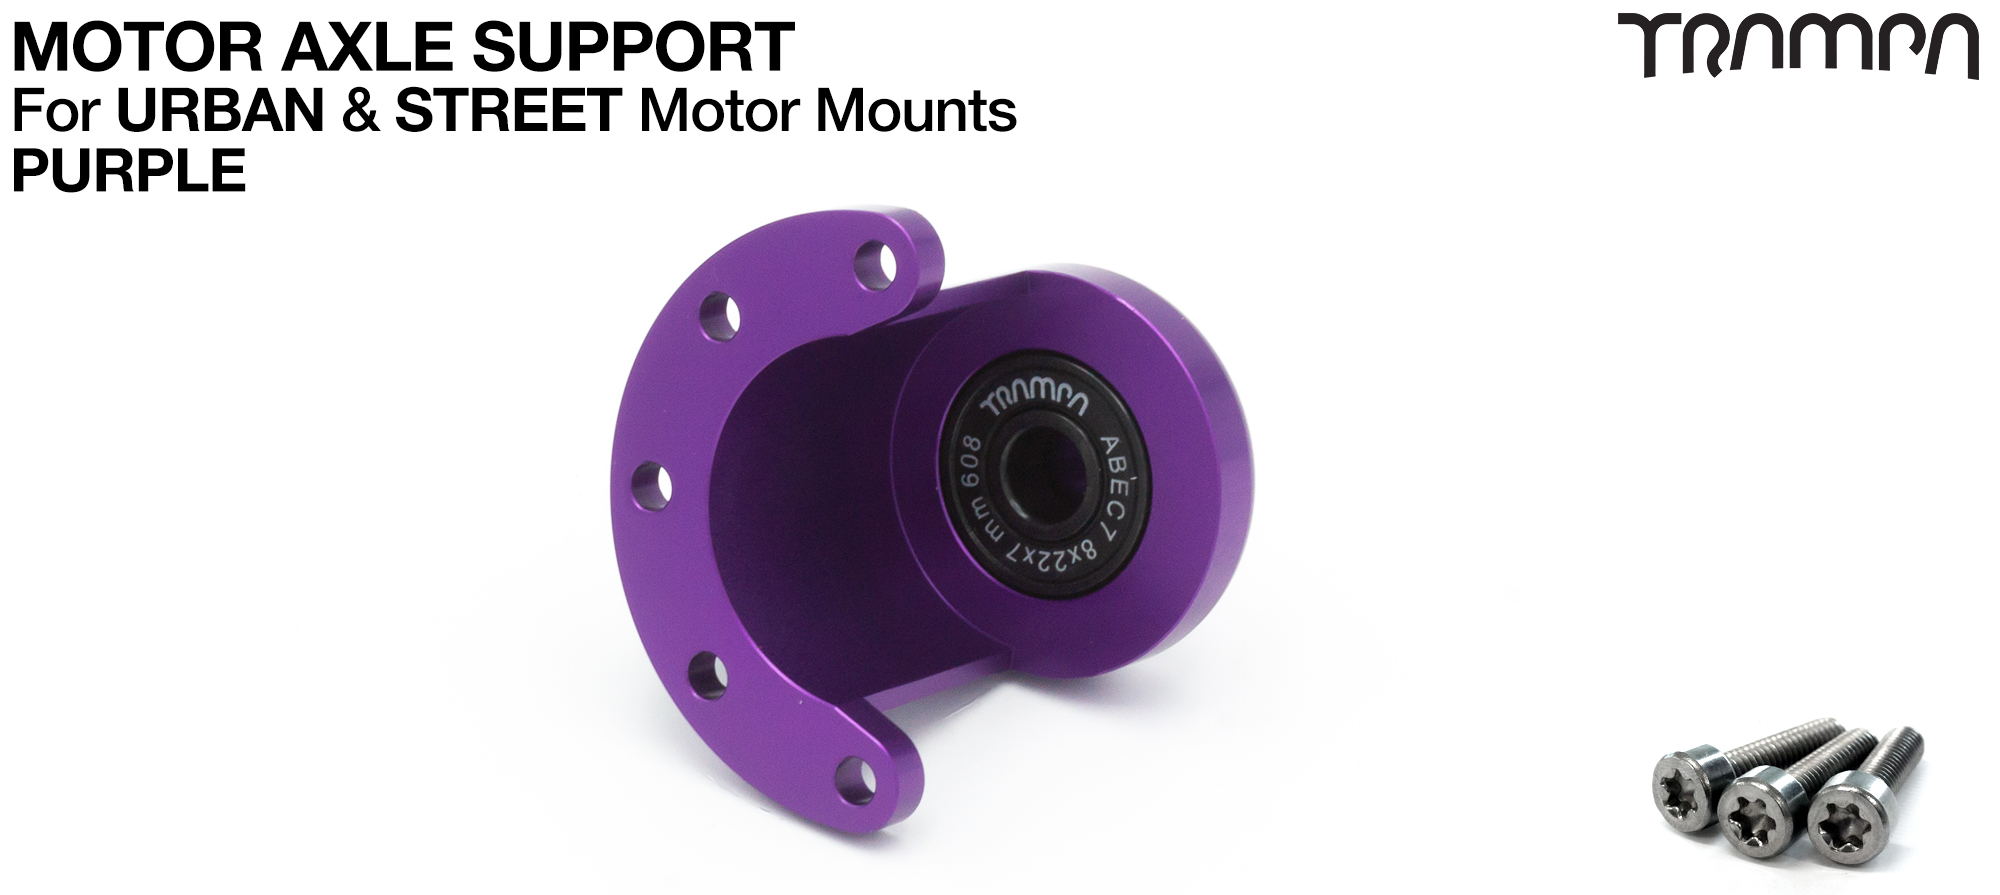 Motor Axle Support Housing with TRAMPA R608 8x22x7mm Bearing, C-Clip & Stainless Steel fixing Bolts for ORRSOM Longboard Motor Mounts  - PURPLE